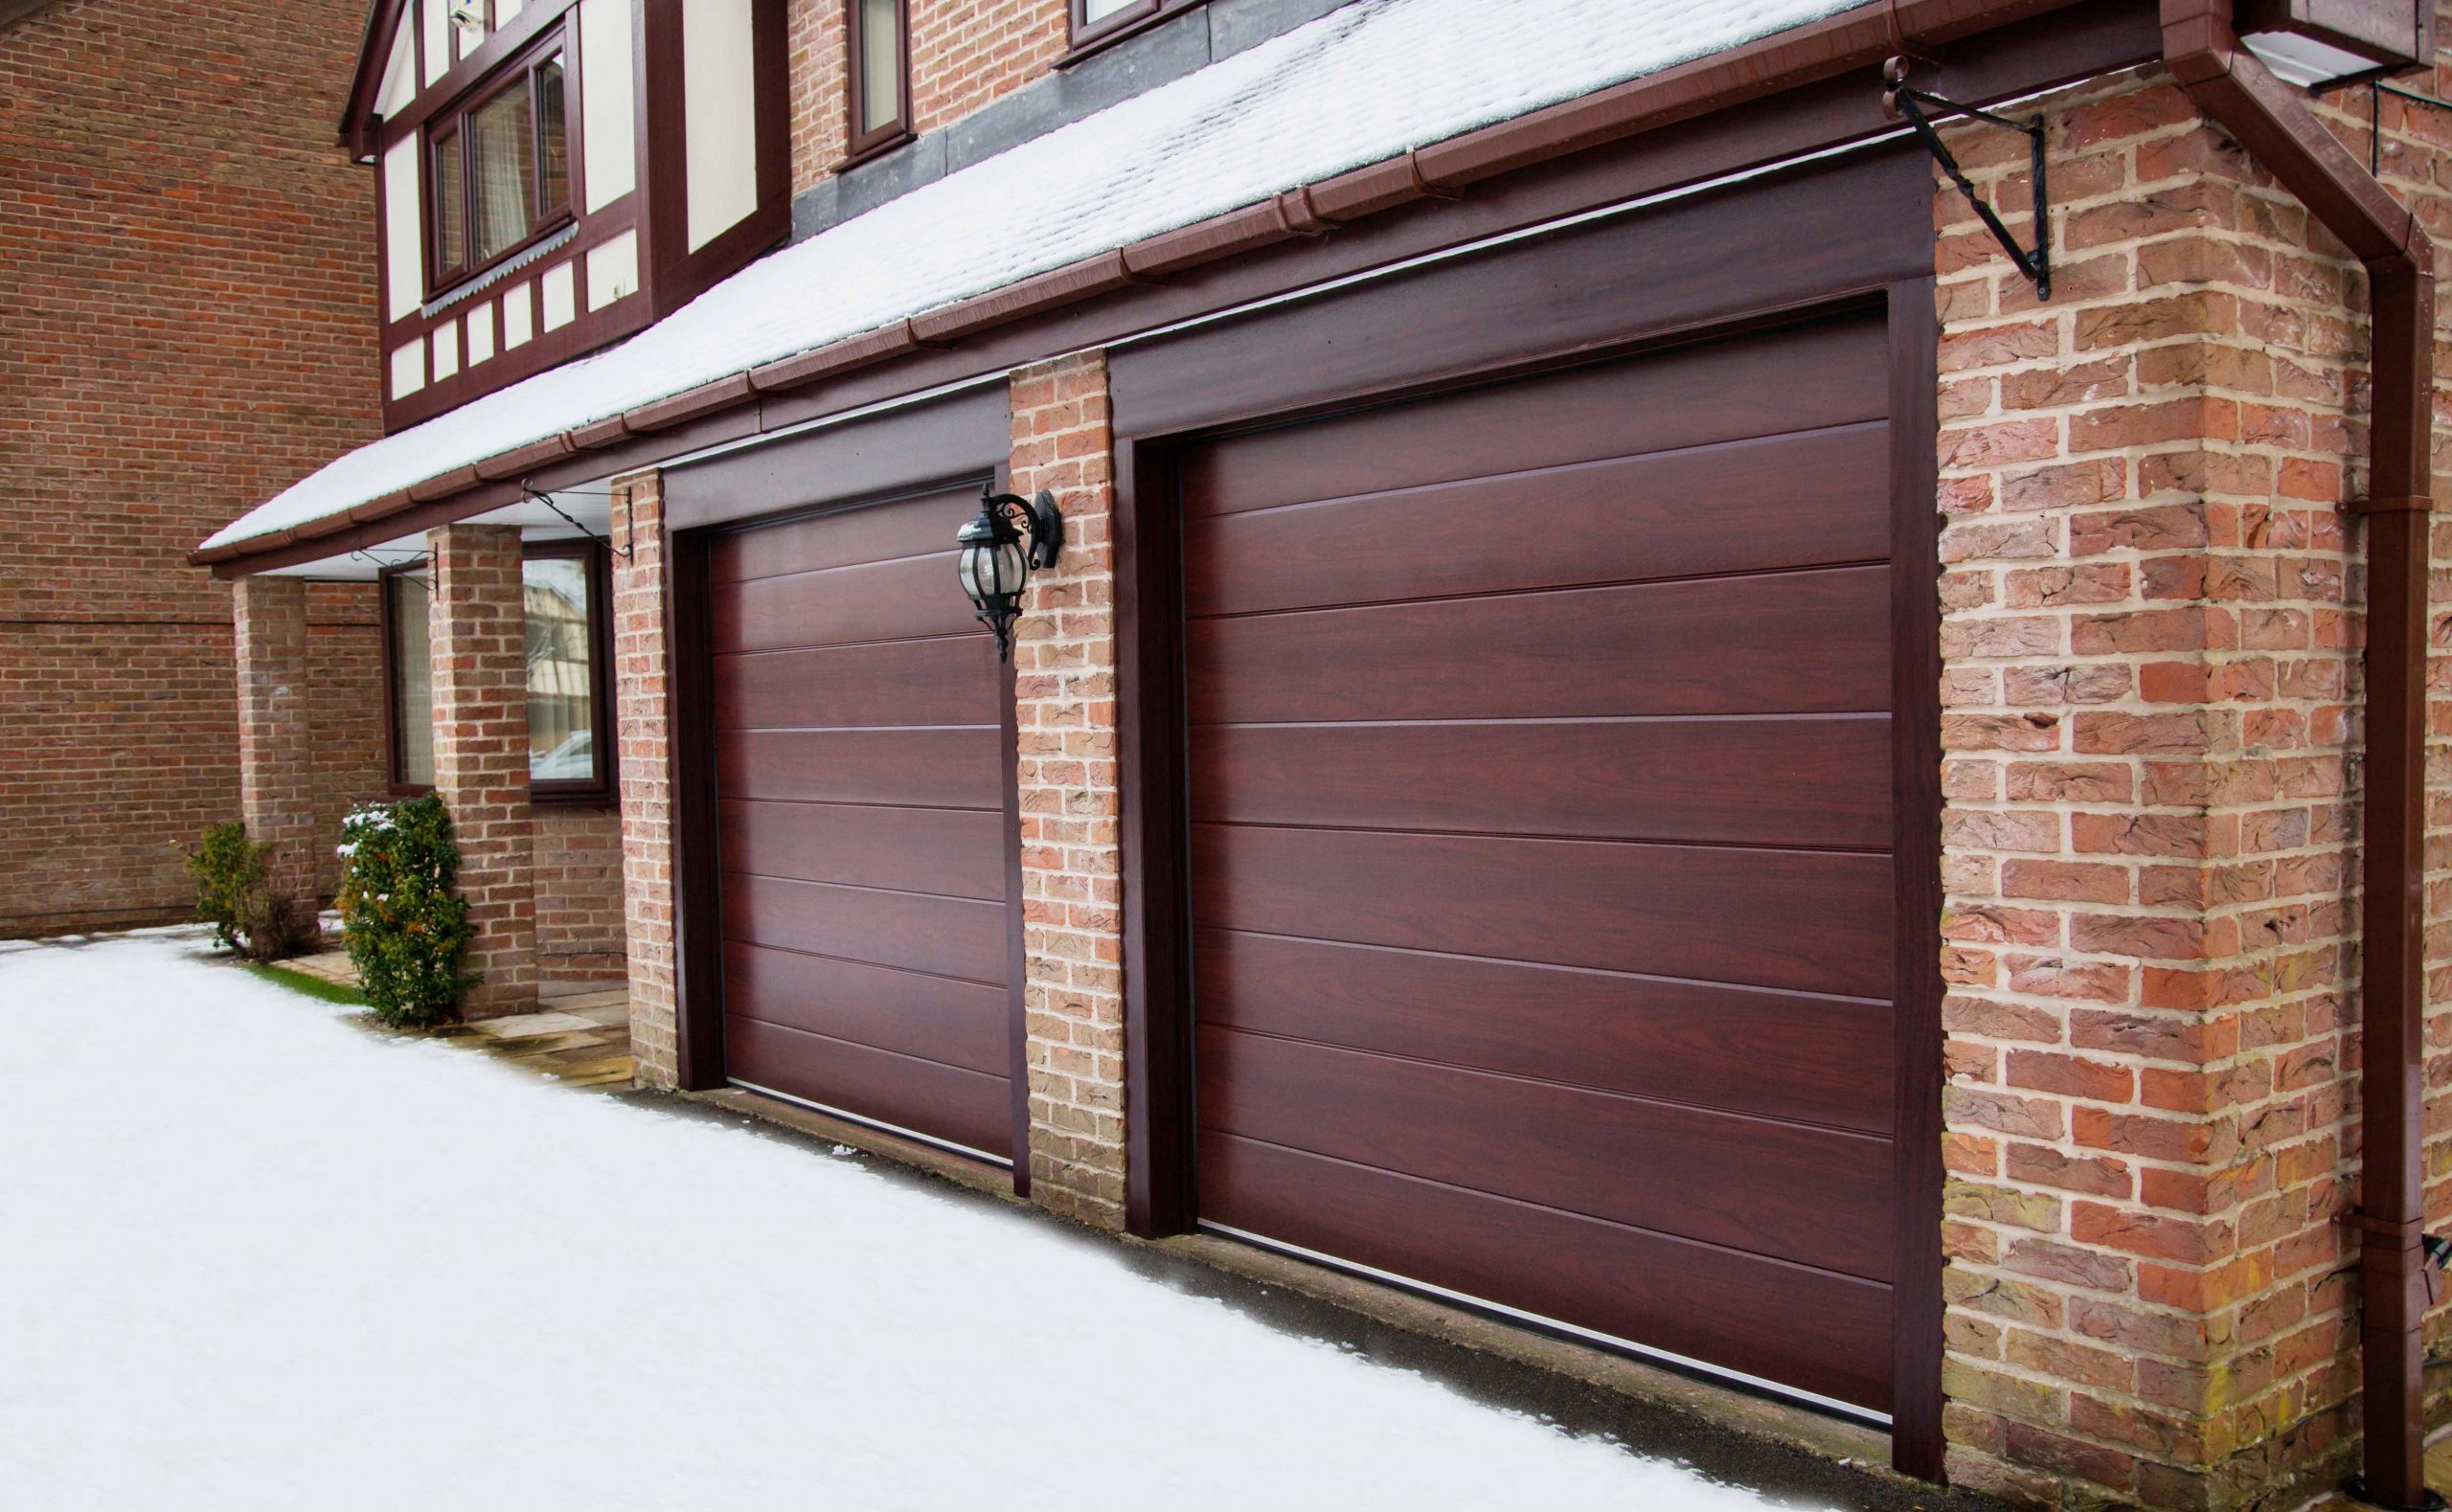 Creatice How Much Is A Commercial Garage Door with Simple Decor